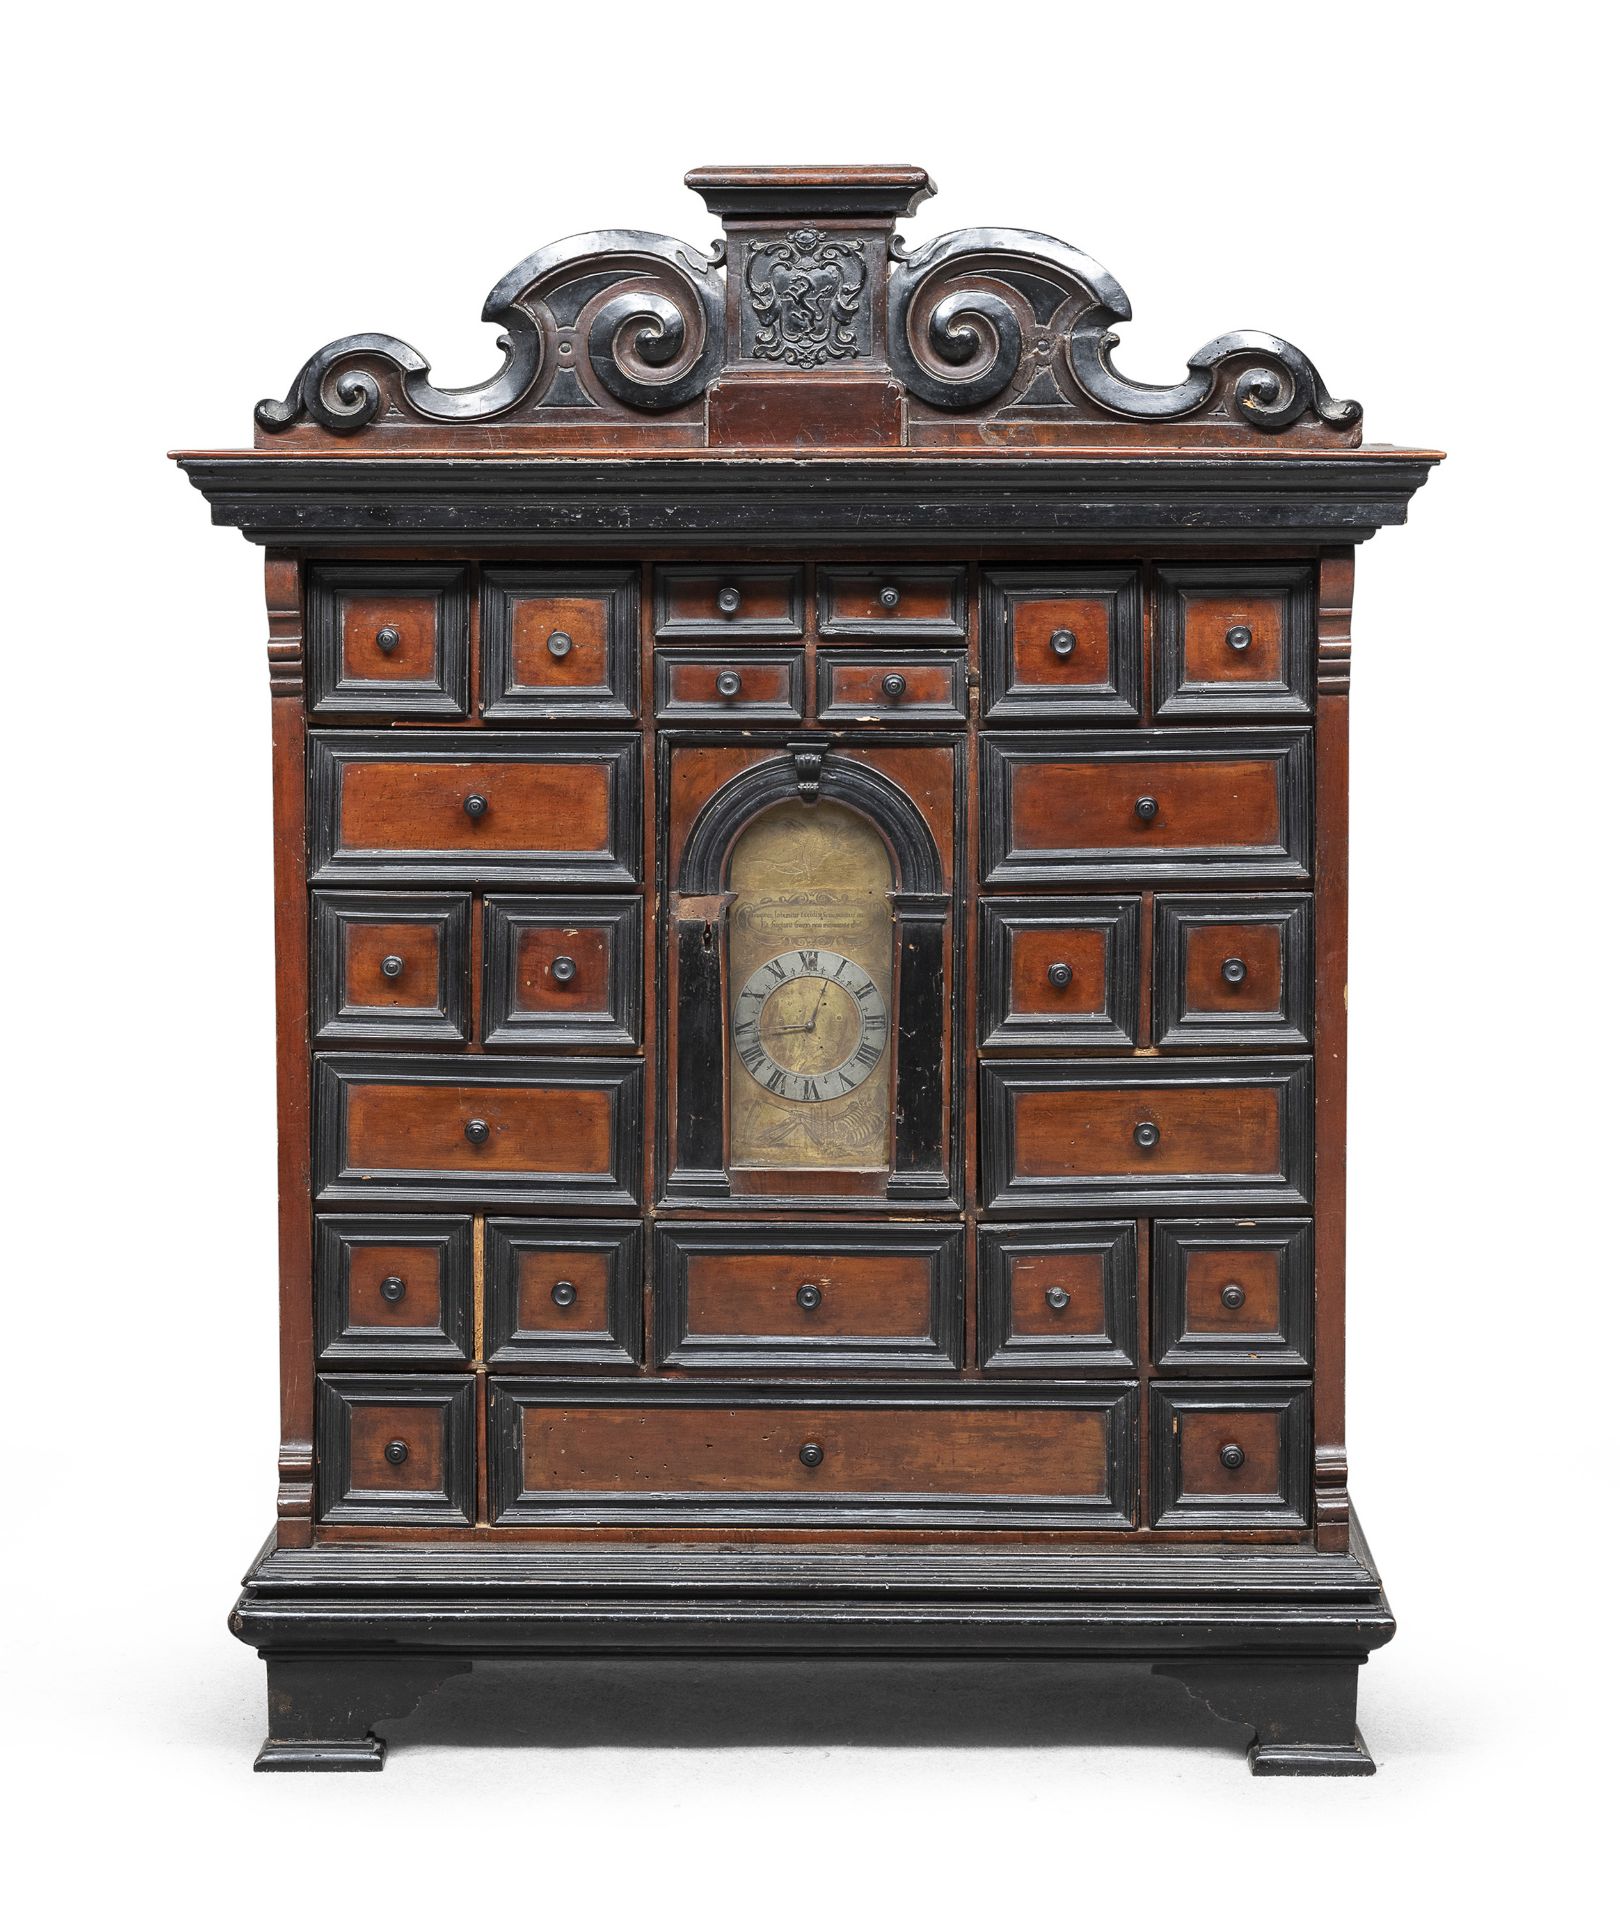 RARE WALNUT COIN CABINET WITH CLOCK PROBABLY ROME 18TH CENTURY